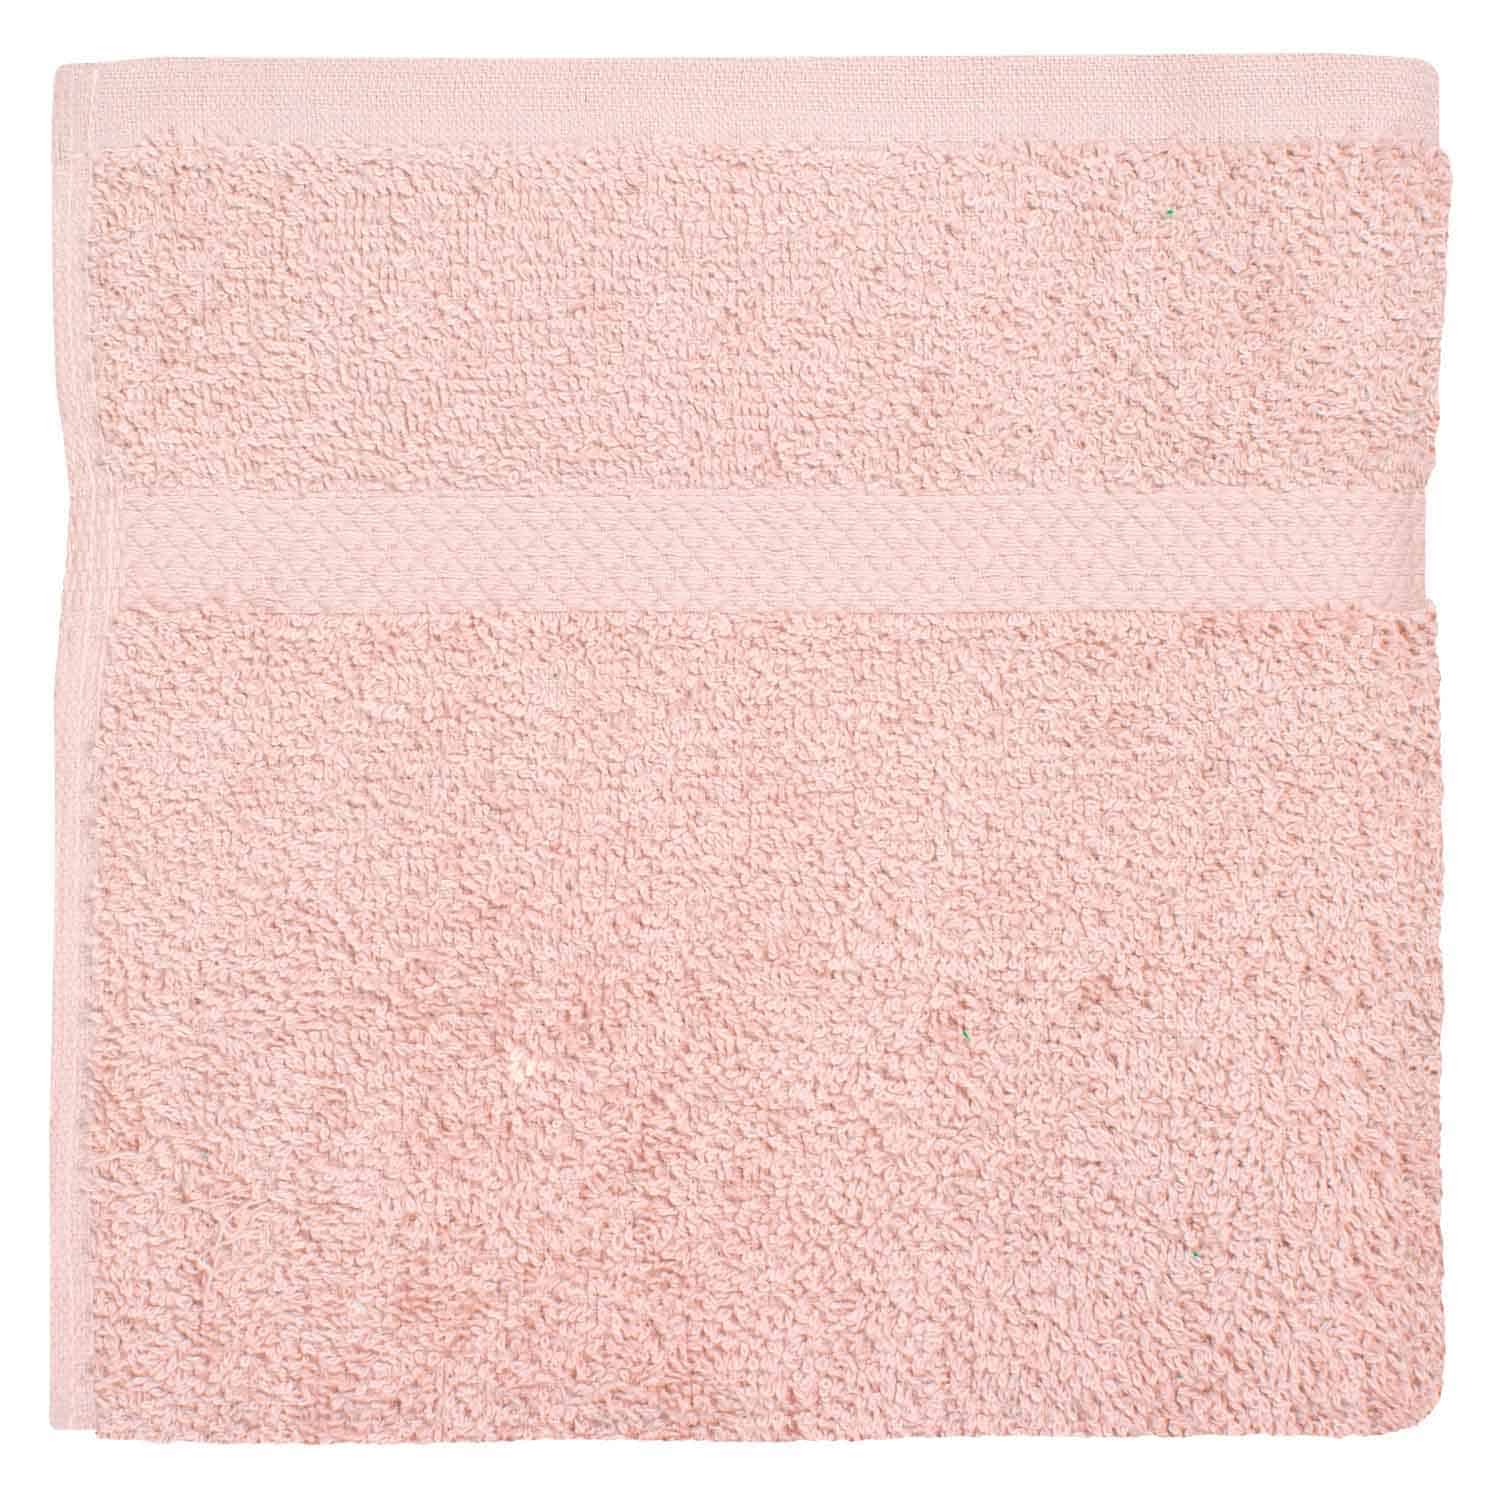 American Dawn | 24X50 Inch Premium Rose Healthcare Towel | Terry Towel With Single Cam, Dobby Border 